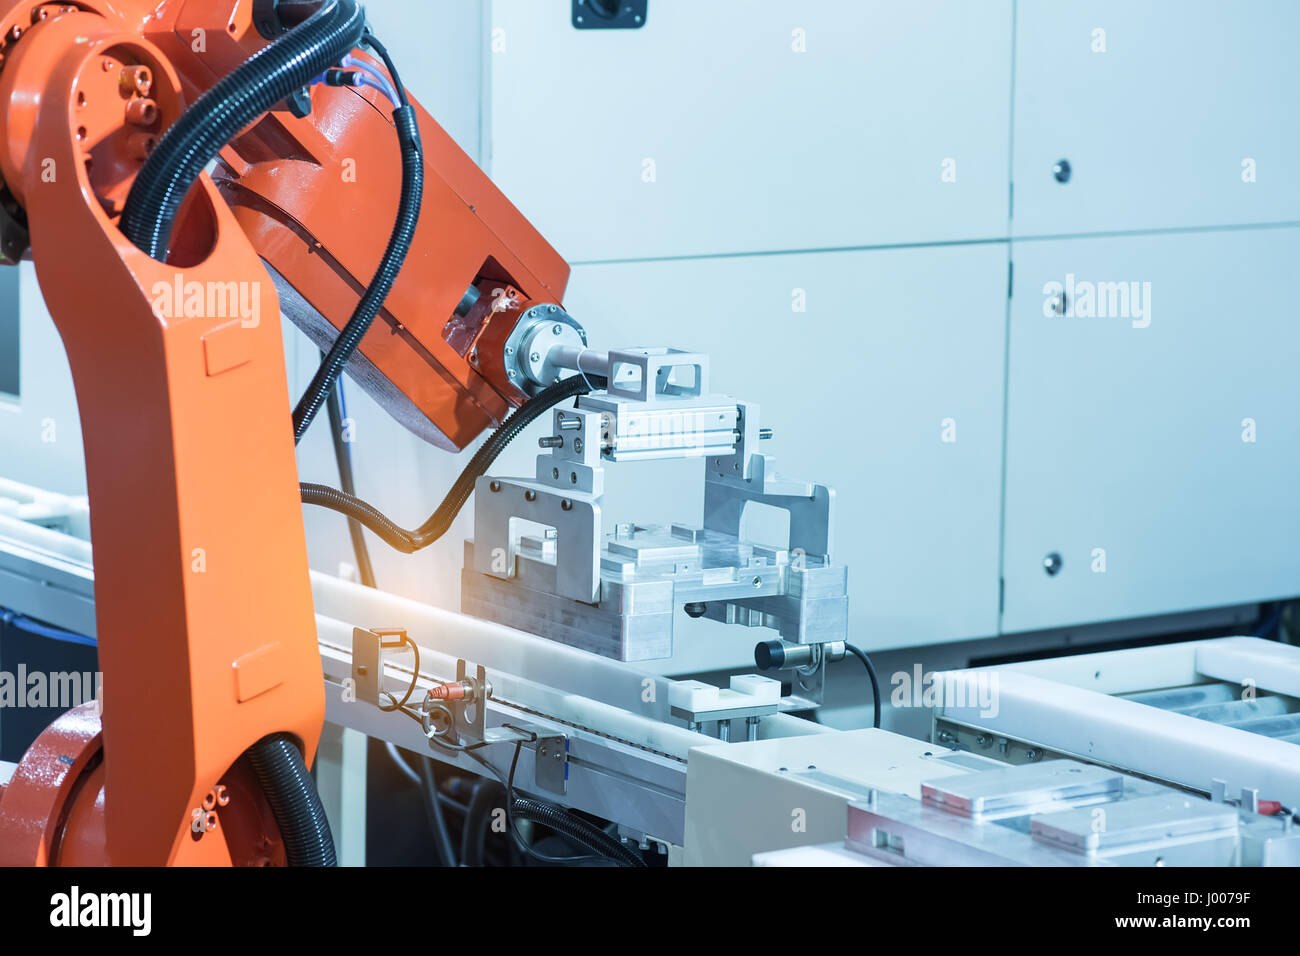 industrial machine and factory robot arm,Smart factory industry 4.0 concept. Stock Photo